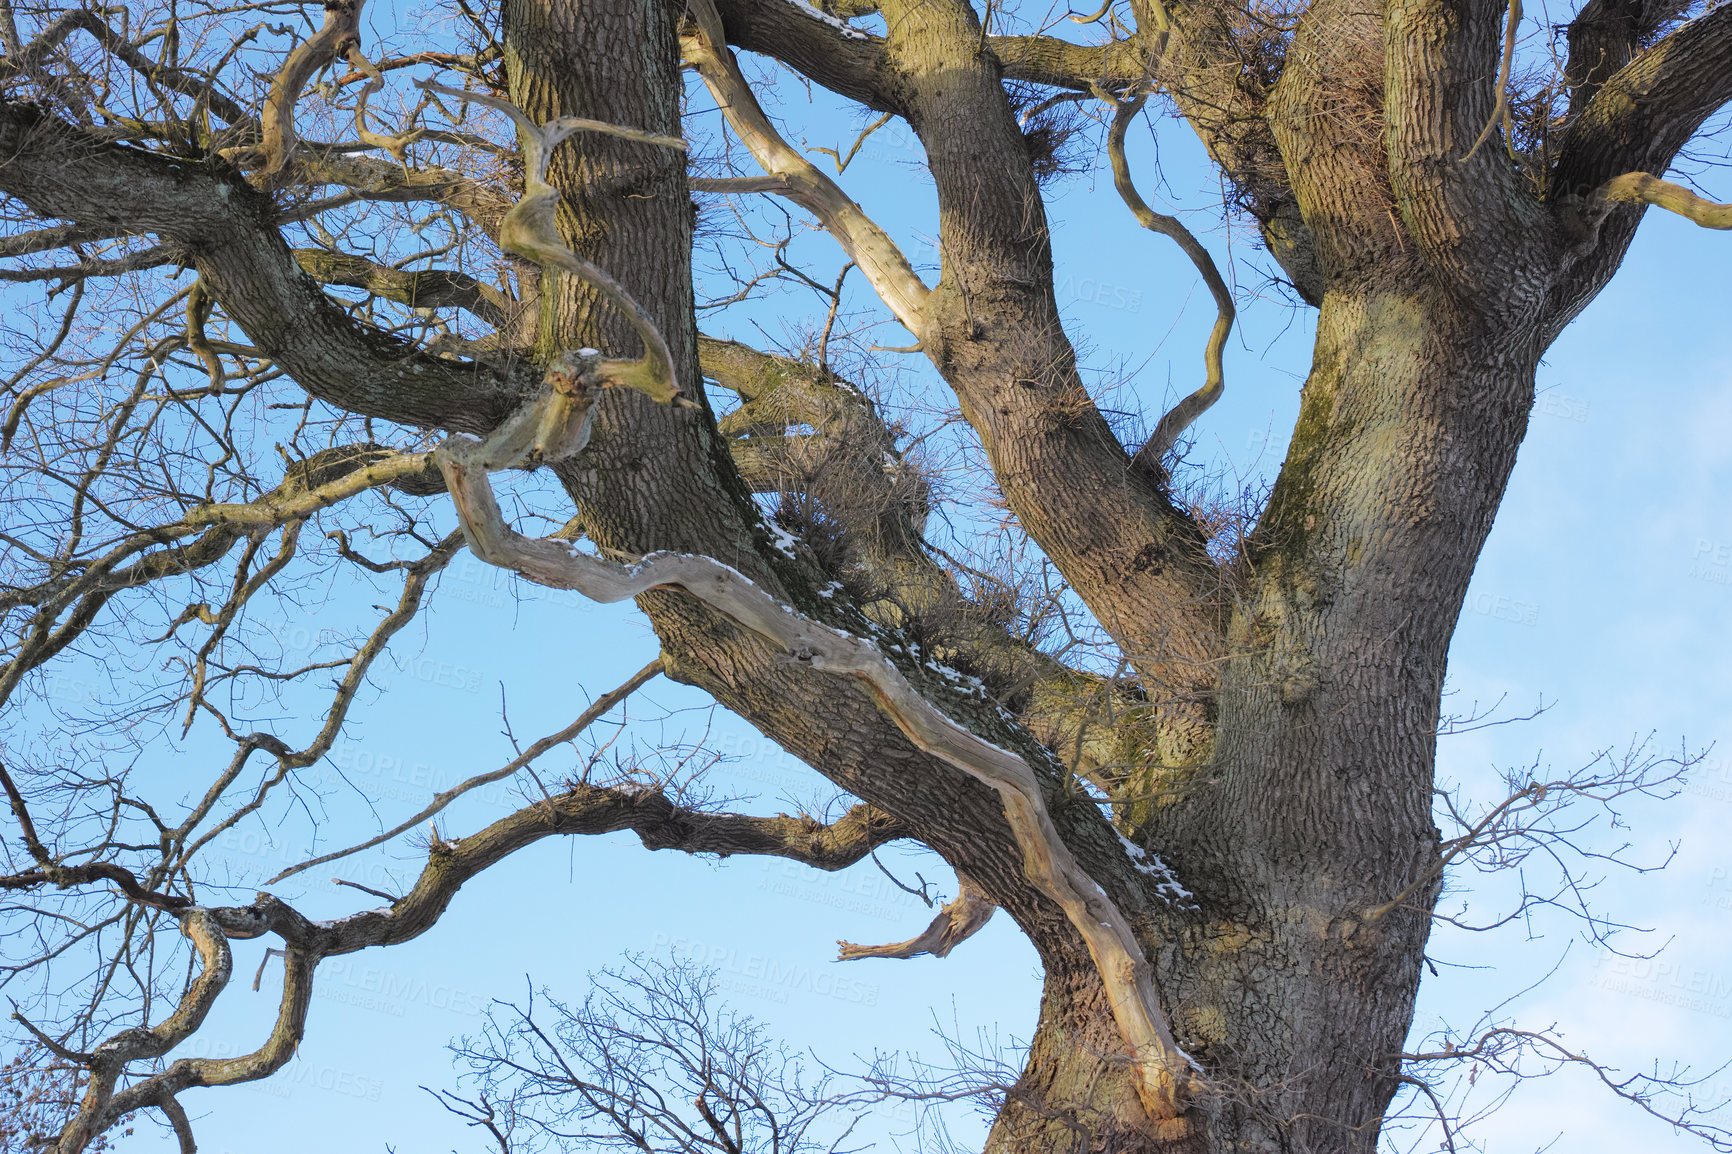 Buy stock photo Beautiful and majestic tree branches thriving in the woods or an eco friendly environment with details of old bark textures and patterns. Closeup of a large oak growing against a clear blue sky.